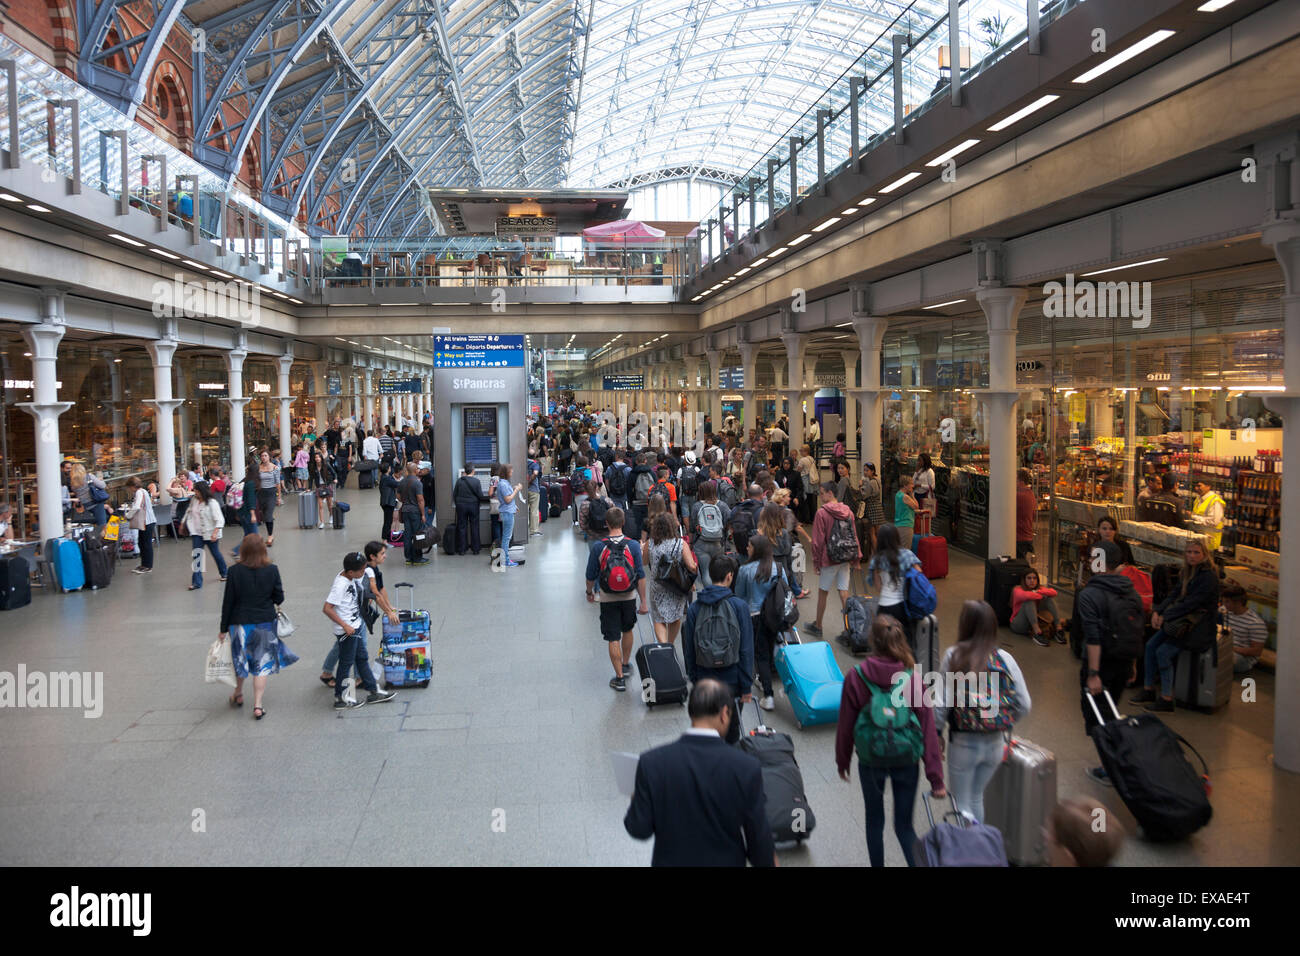 London, UK. 9 July 2015 - The biggest strike on the London Underground in 13 years is causing commuter chaos across the city. At St Pancras International and King's Cross stations masses of travelers arriving from abroad on the Eurostar, as well as trains on the national rail networks are being turned away from the Underground station exit. Credit: Nathaniel Noir/Alamy Live News Stock Photo